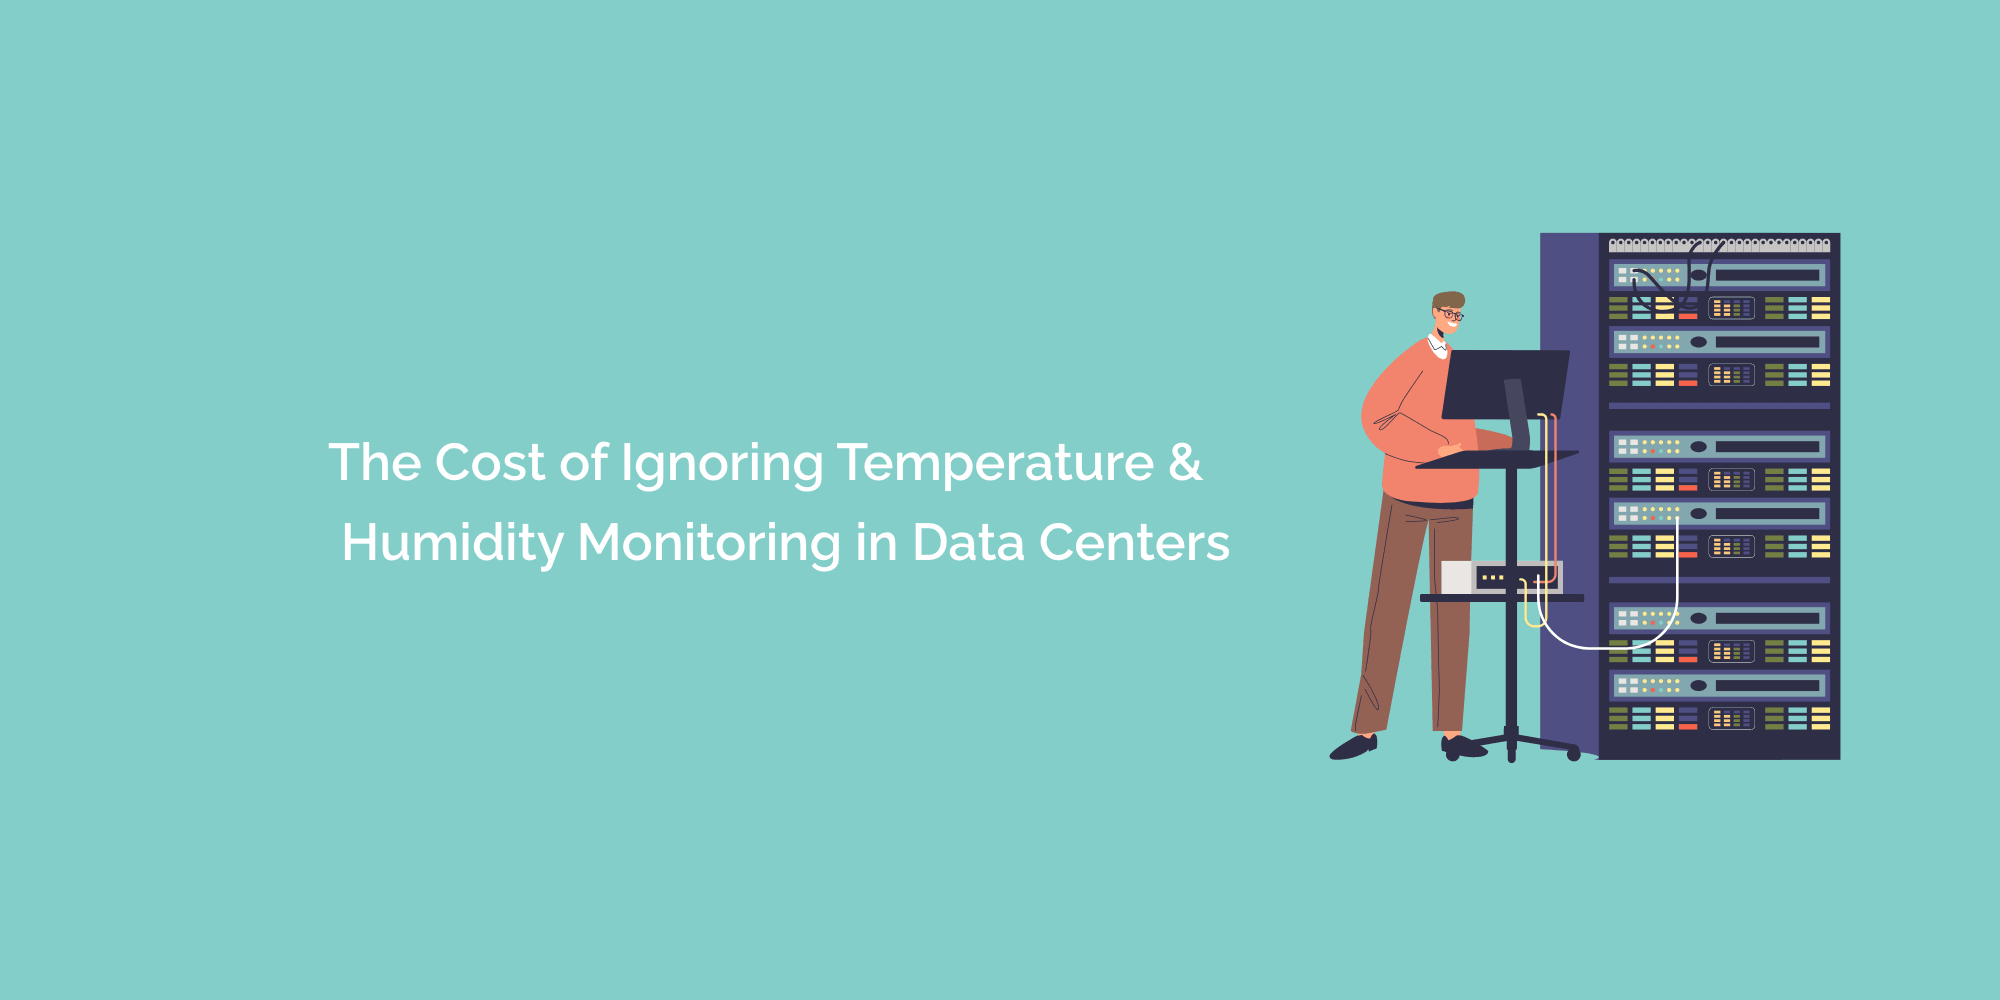 The Cost of Ignoring Temperature and Humidity Monitoring in Data Centers